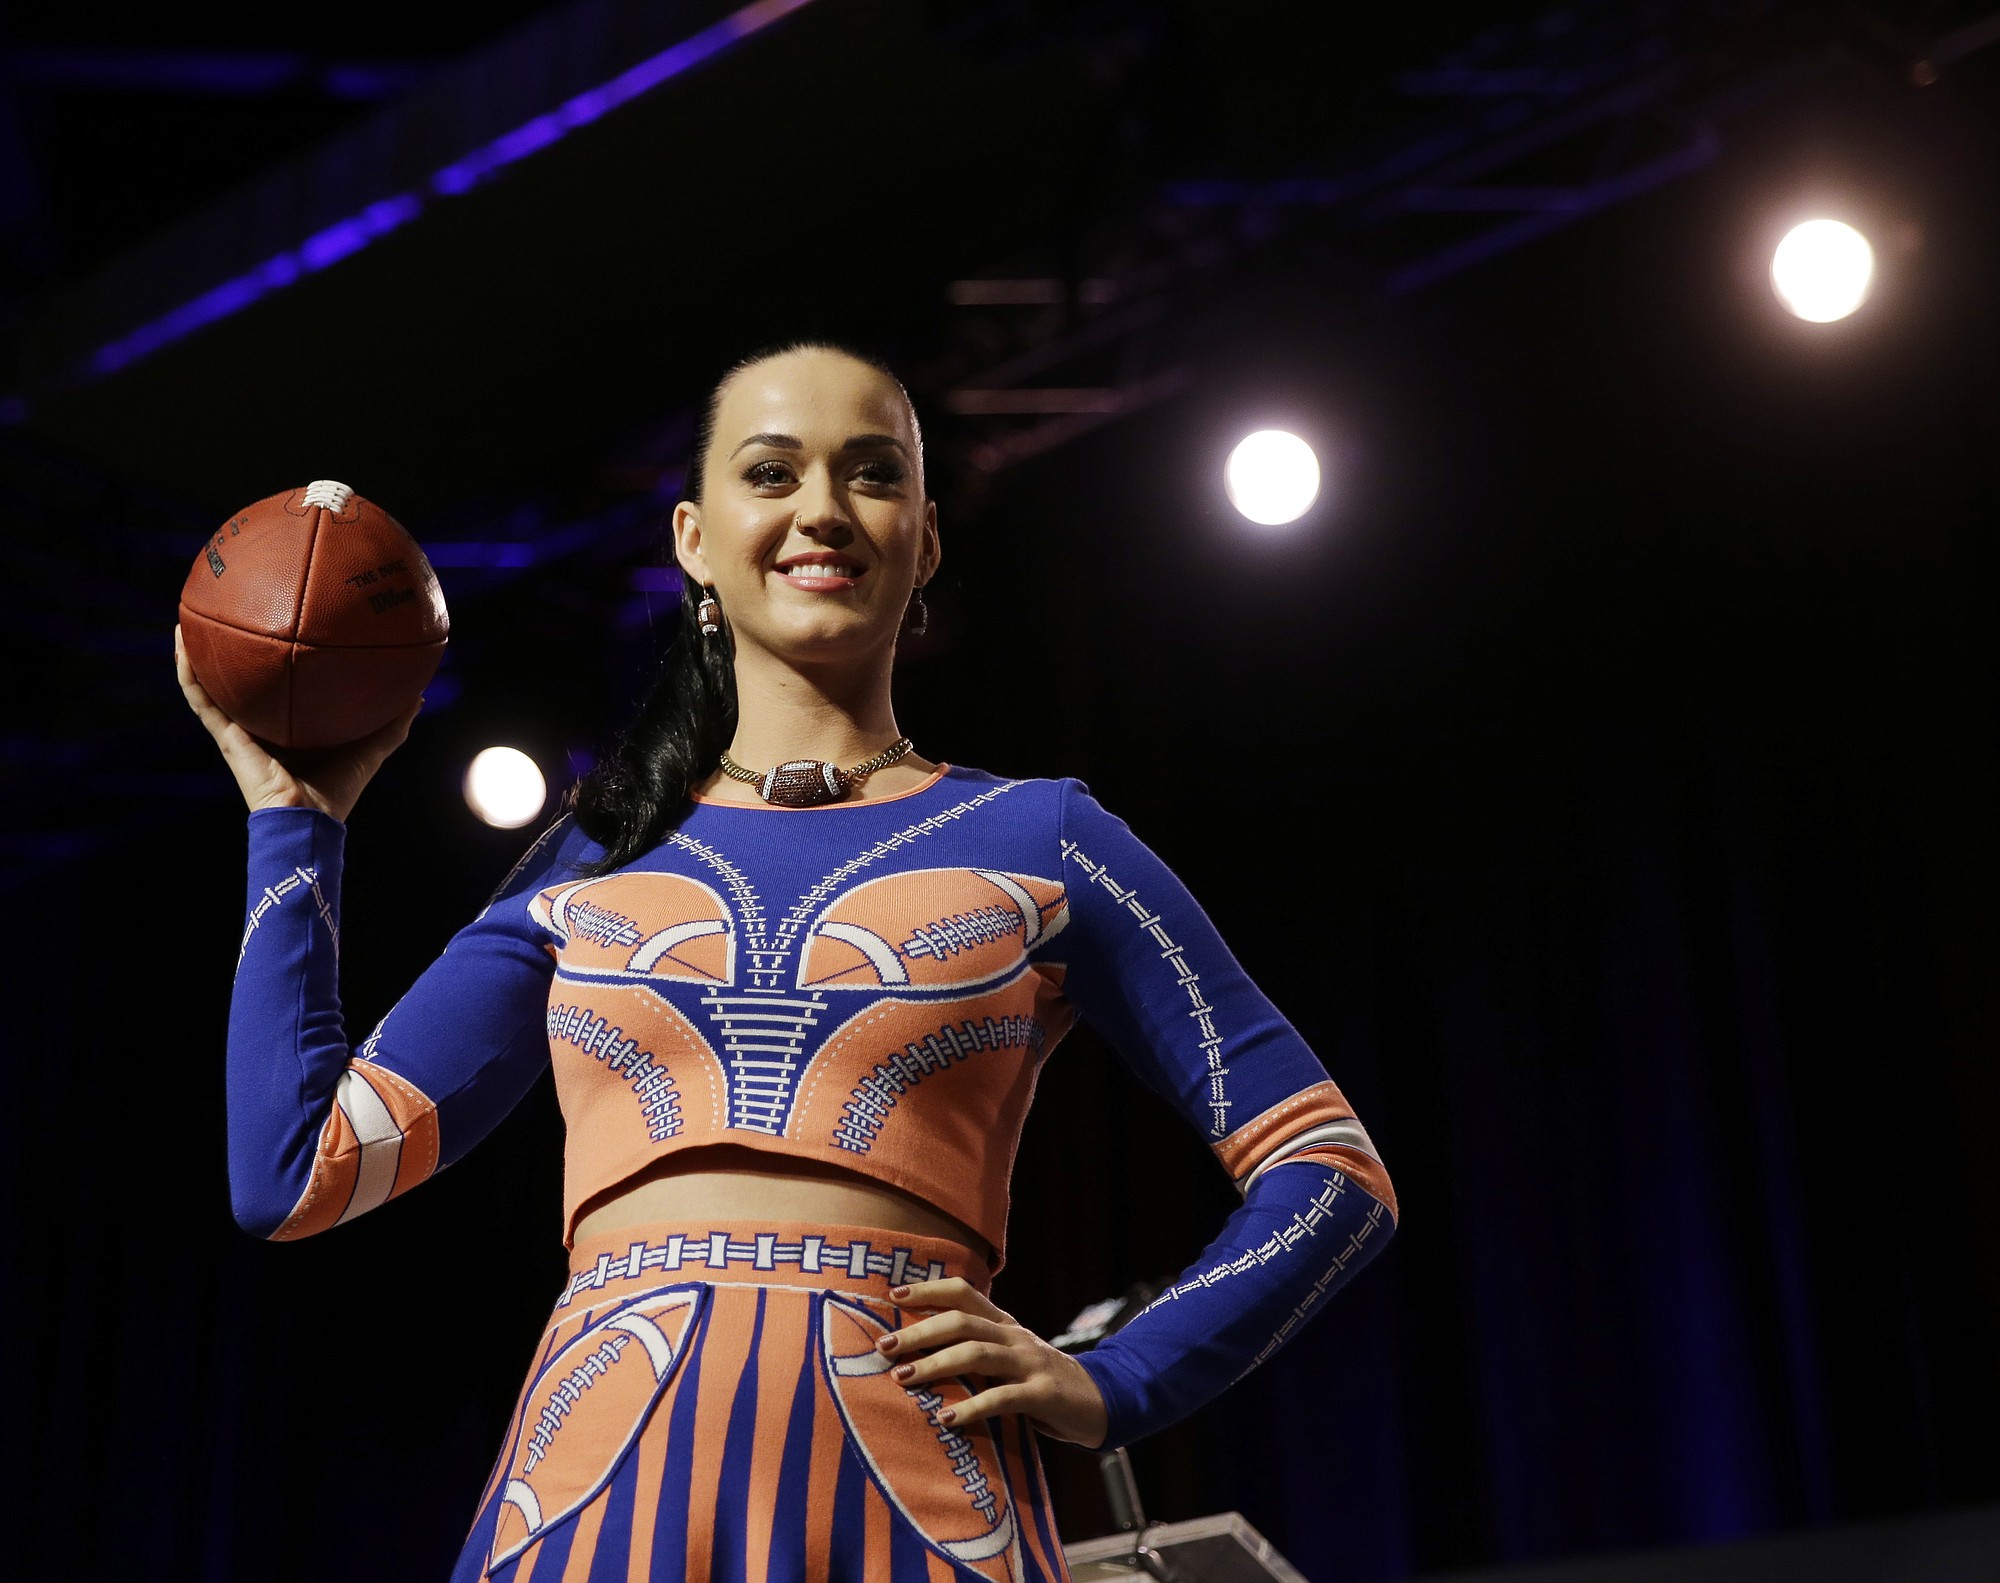 Katy Perry shows off her dress at a news conference Thursday for the halftime show of Super Bowl XLIX. (AP Photo/David J.